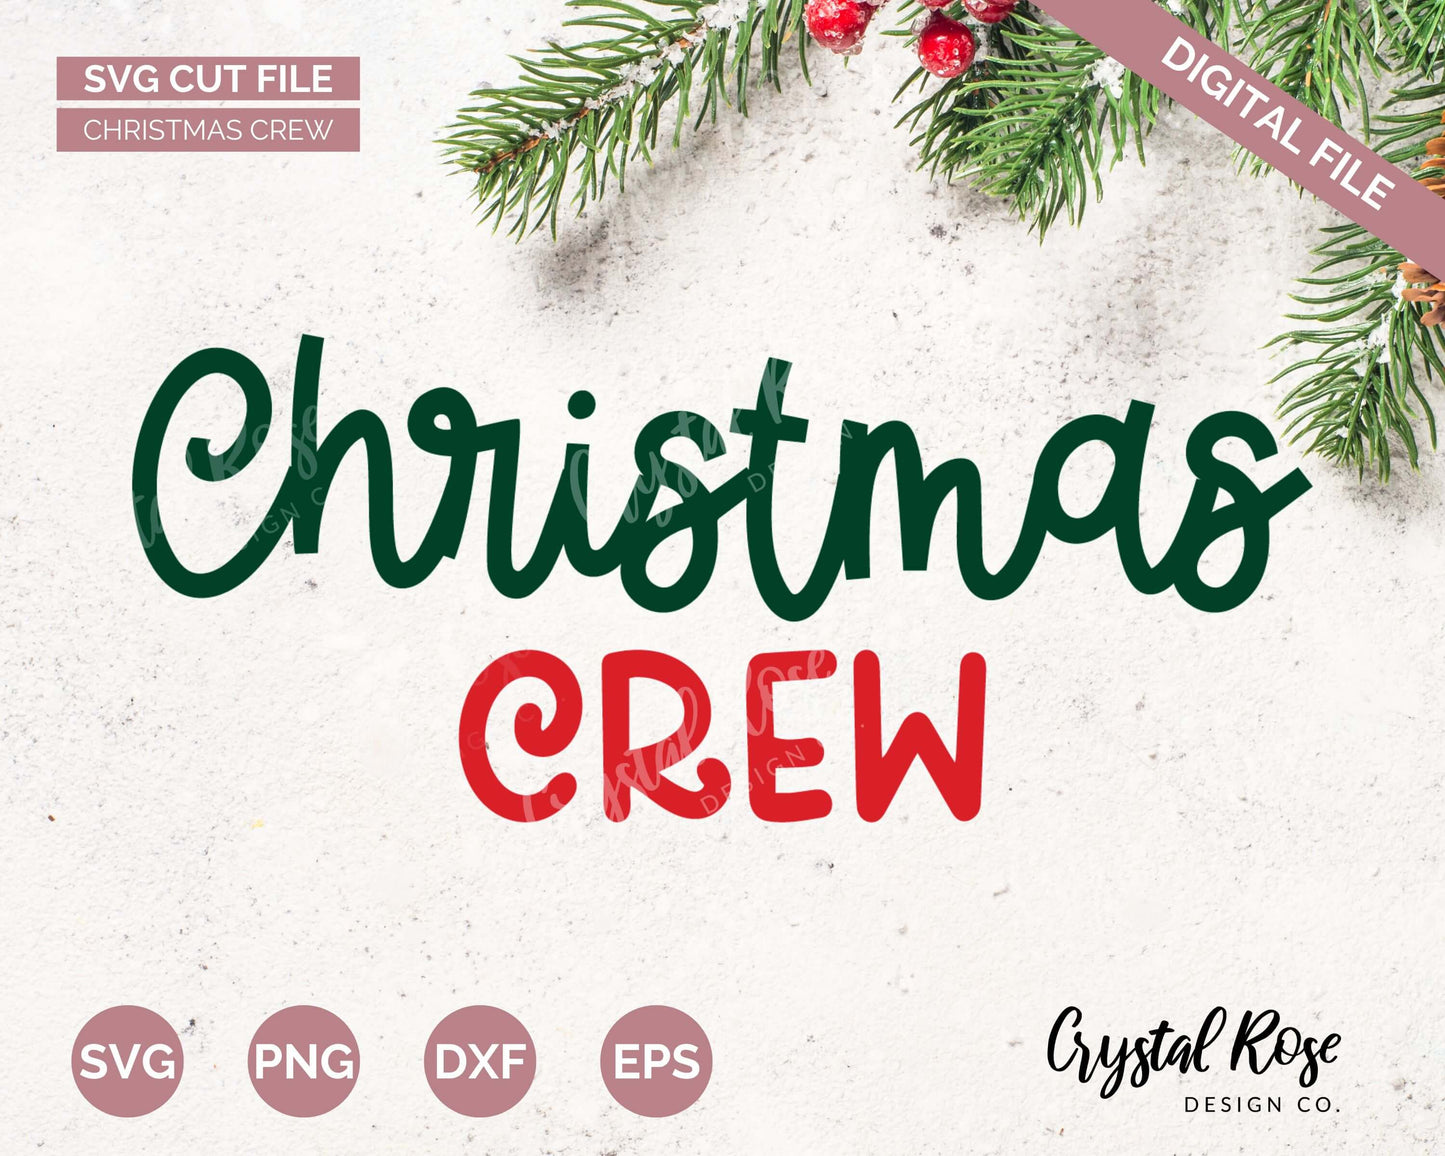 Christmas Crew SVG, Digital Download, Cricut, Silhouette, Glowforge (includes svg/png/dxf/eps)